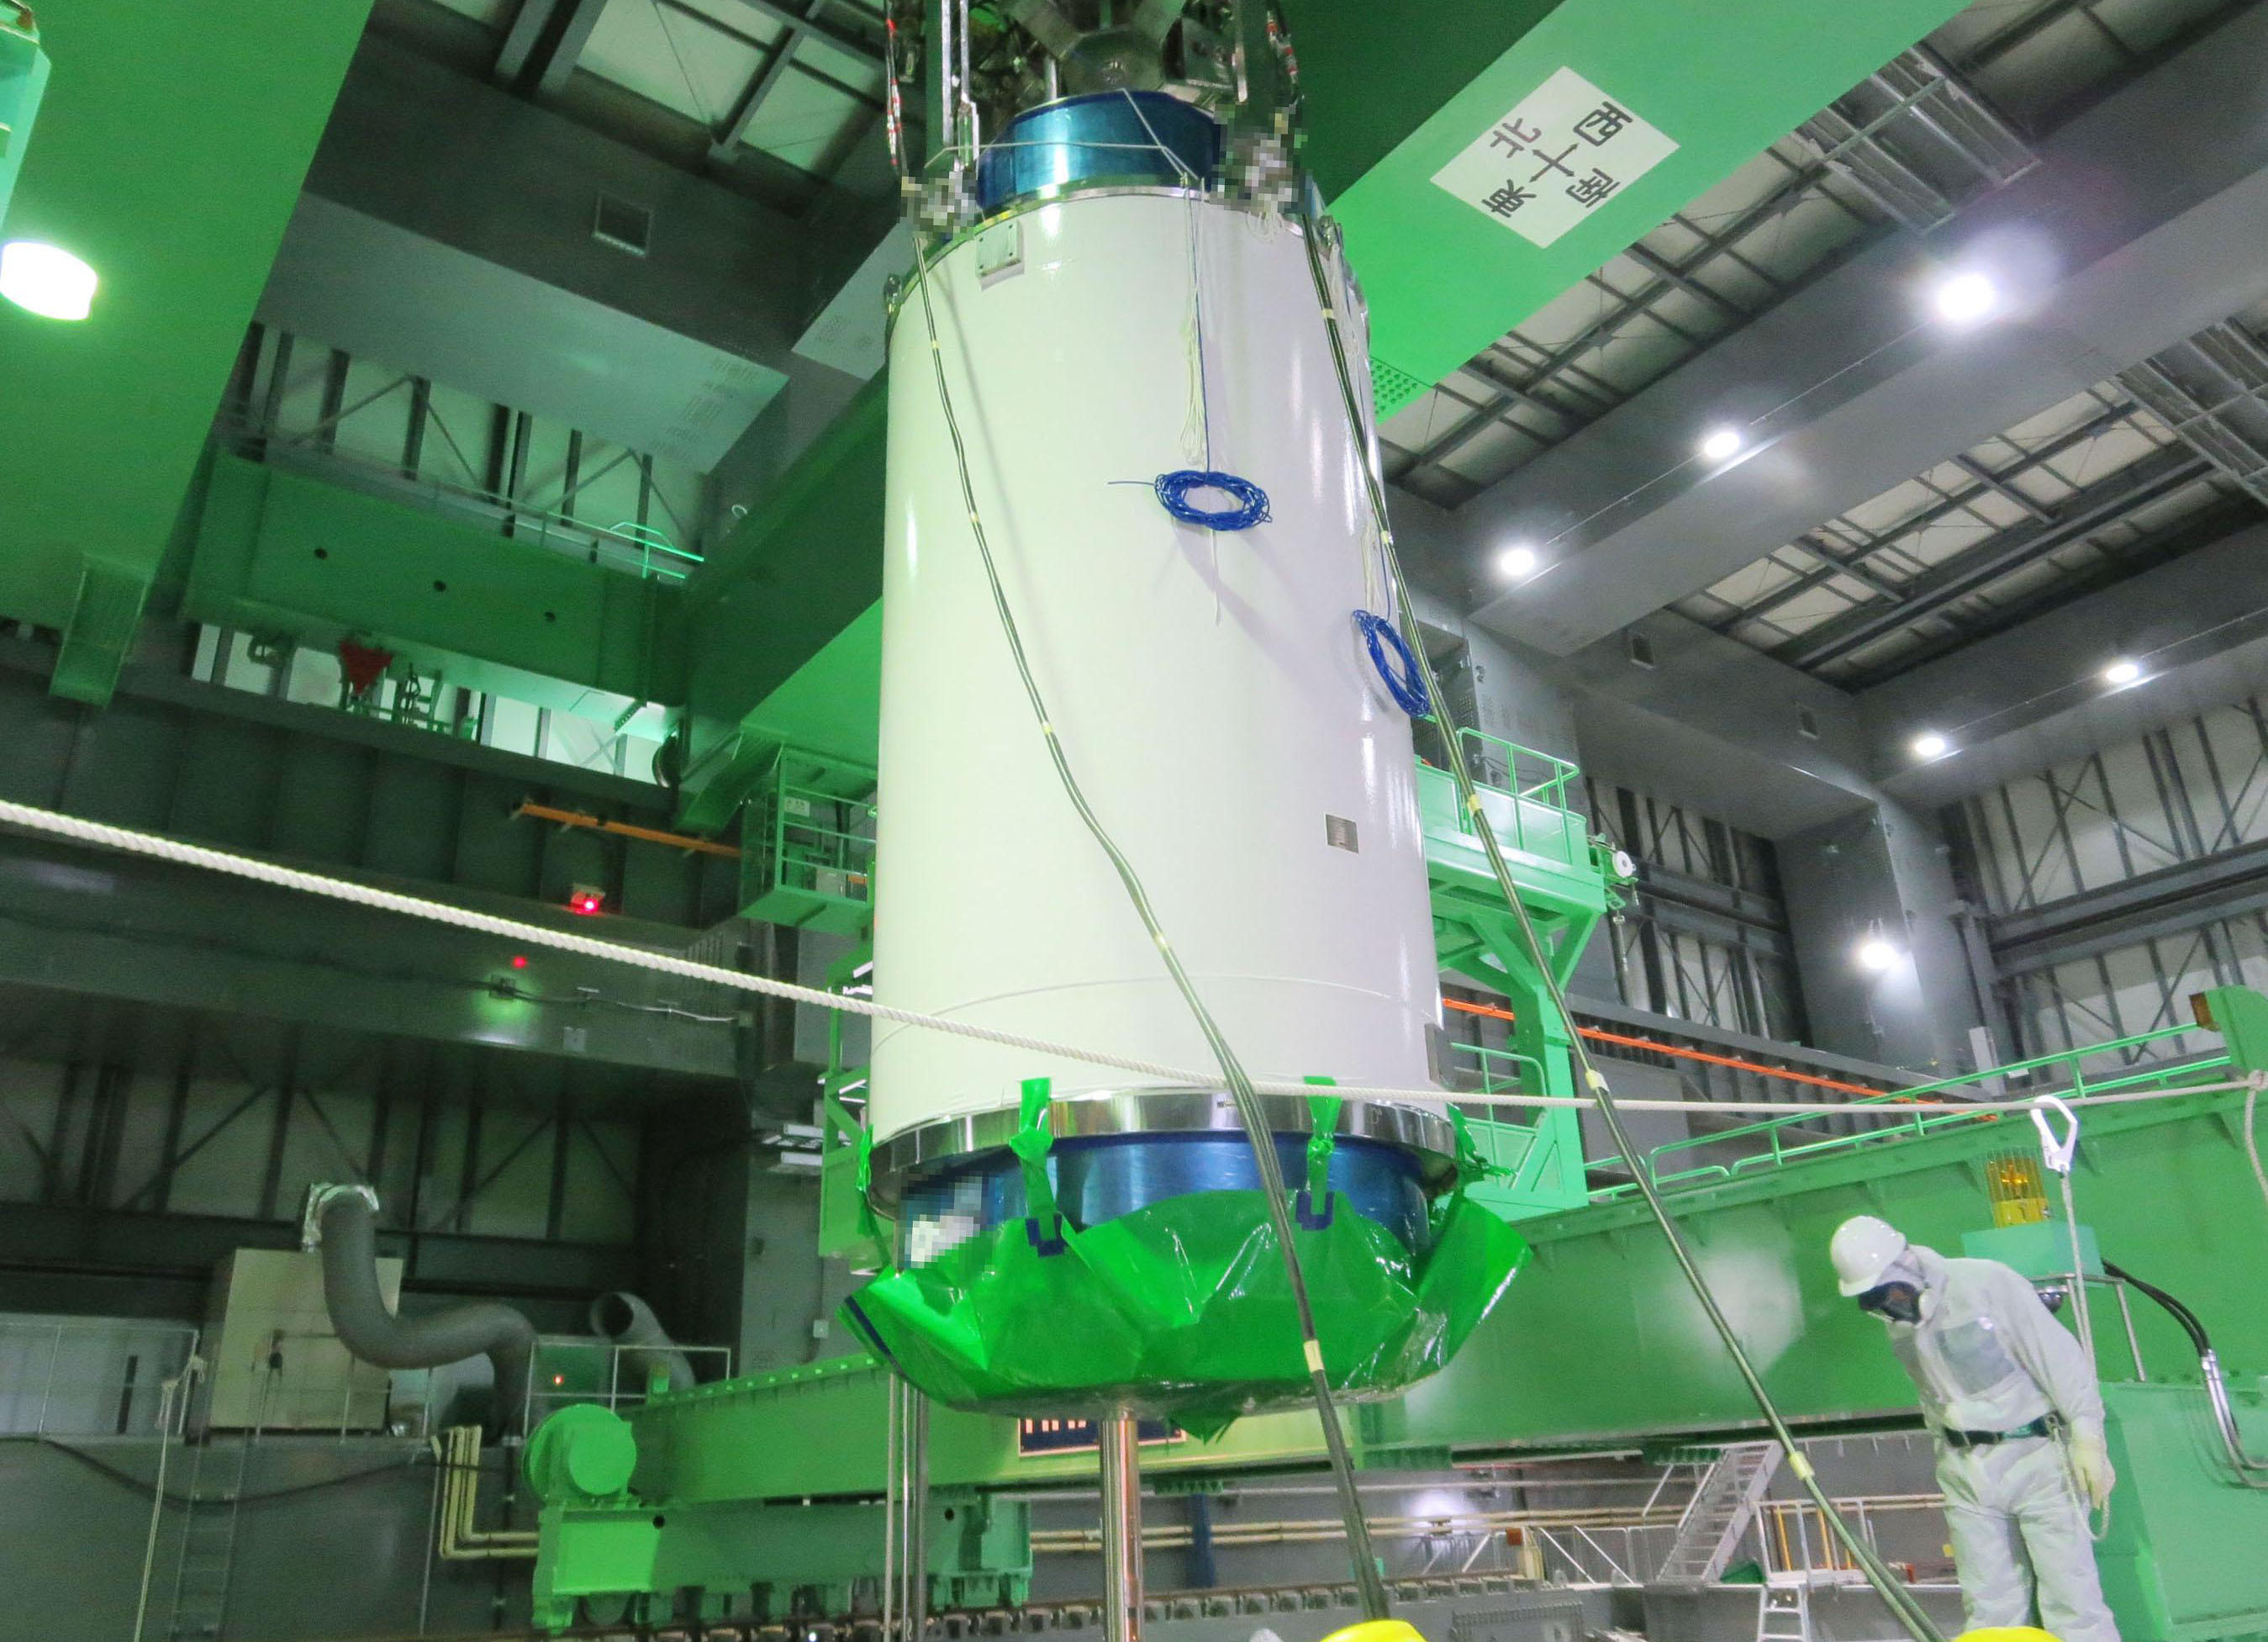 Risky business: A special transport cask for removing nuclear fuel assemblies is moved inside the building housing reactor 4 at the Fukushima No. 1 power plant Monday. | TEPCO/KYODO